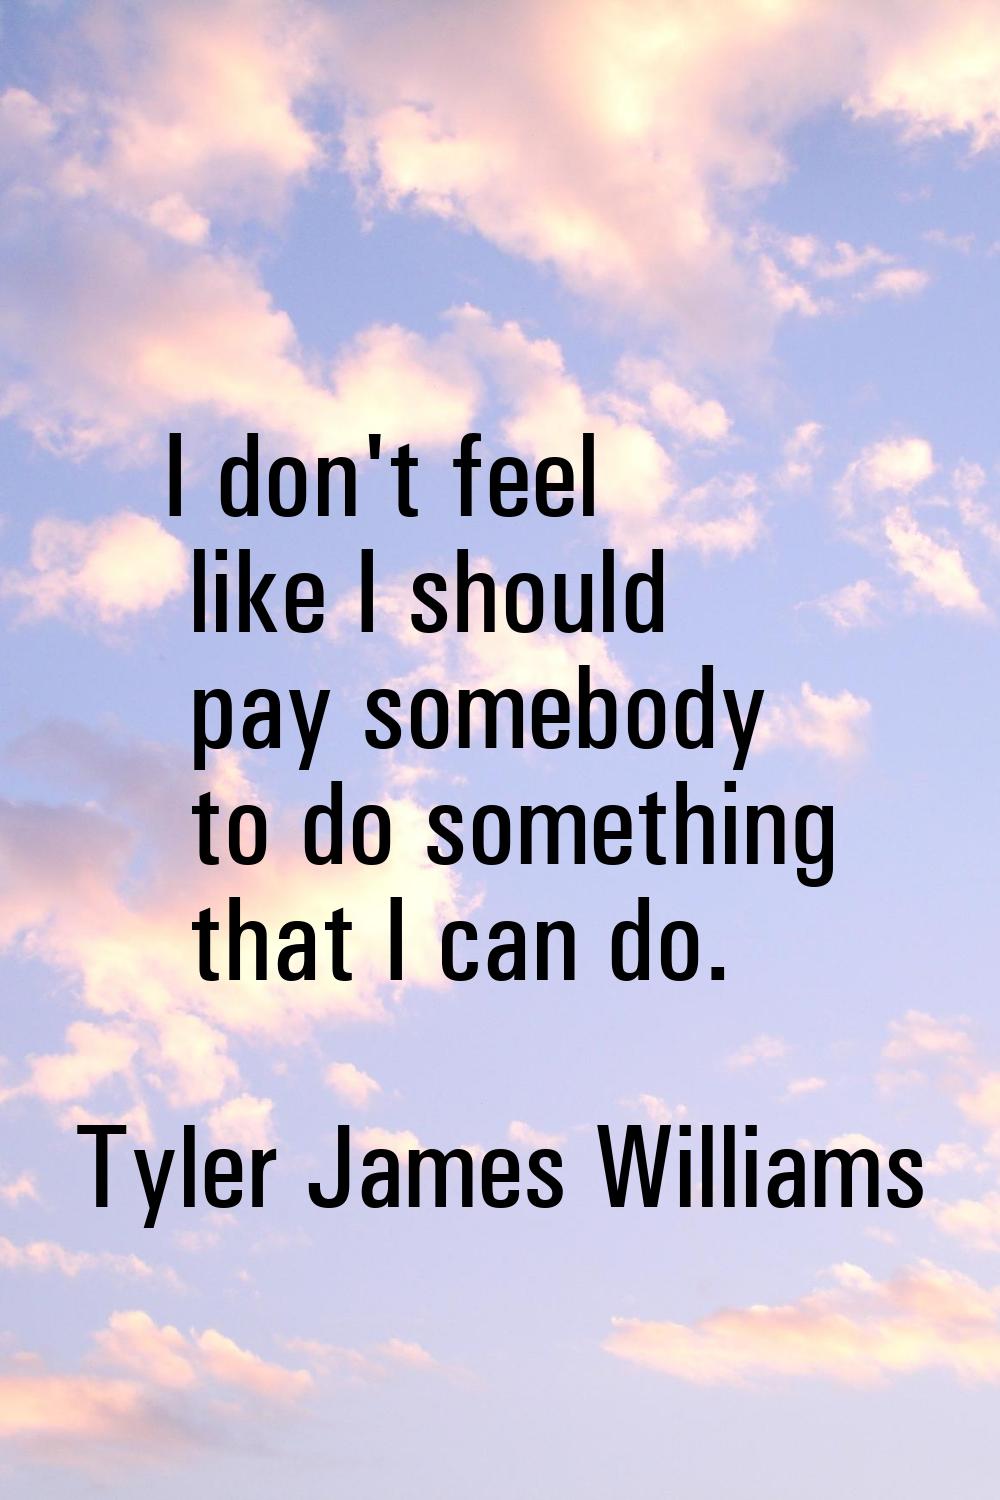 I don't feel like I should pay somebody to do something that I can do.